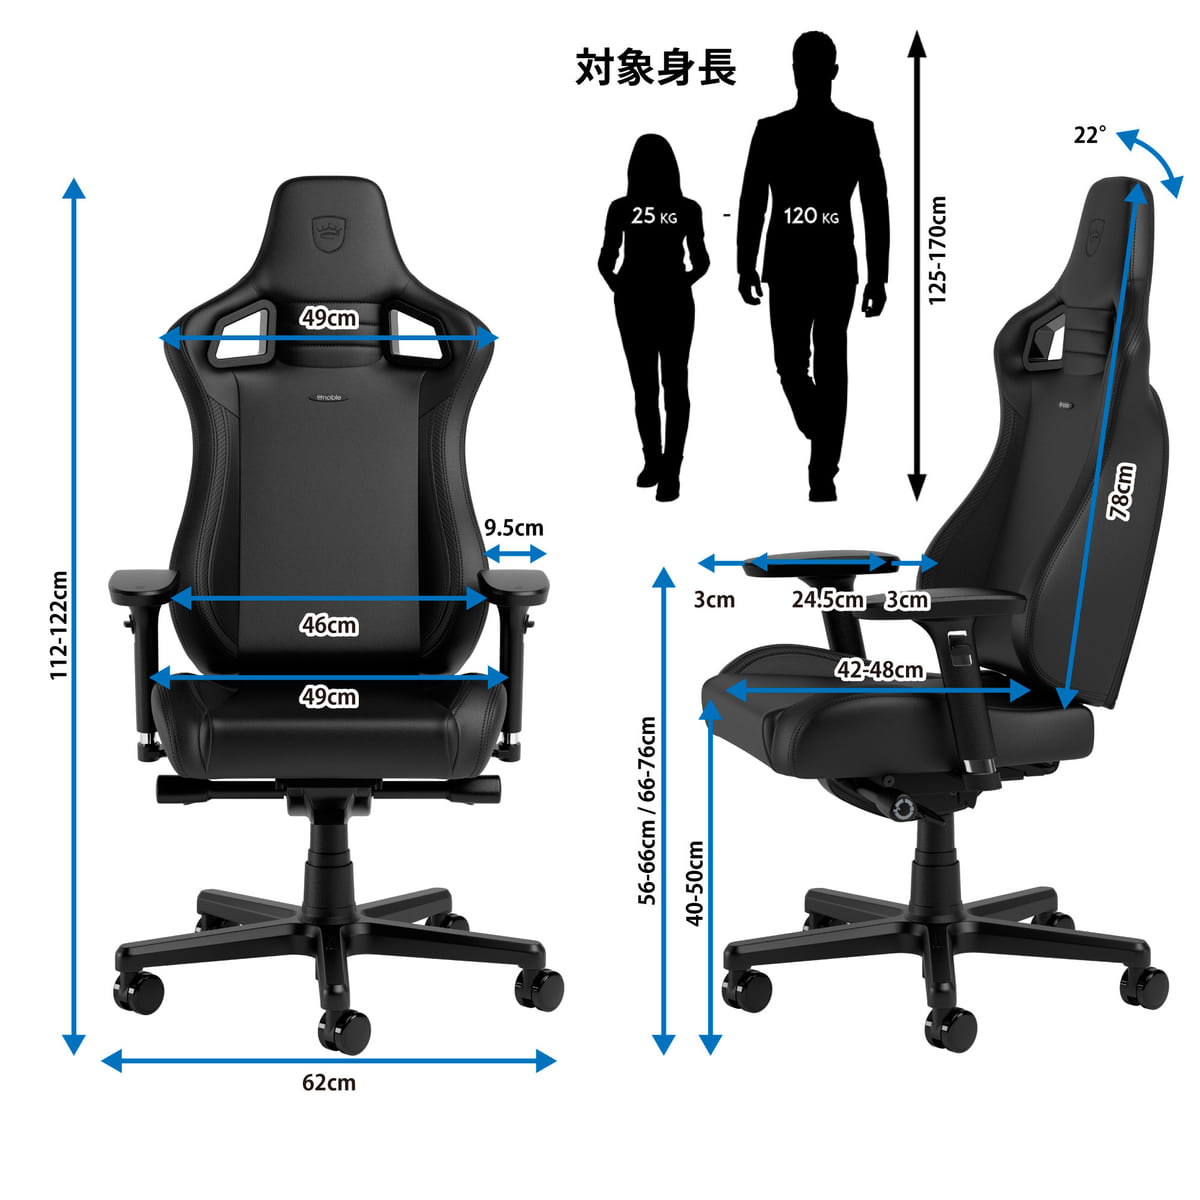 noblechairs(ノーブルチェアーズ)「EPIC COMPACT」７